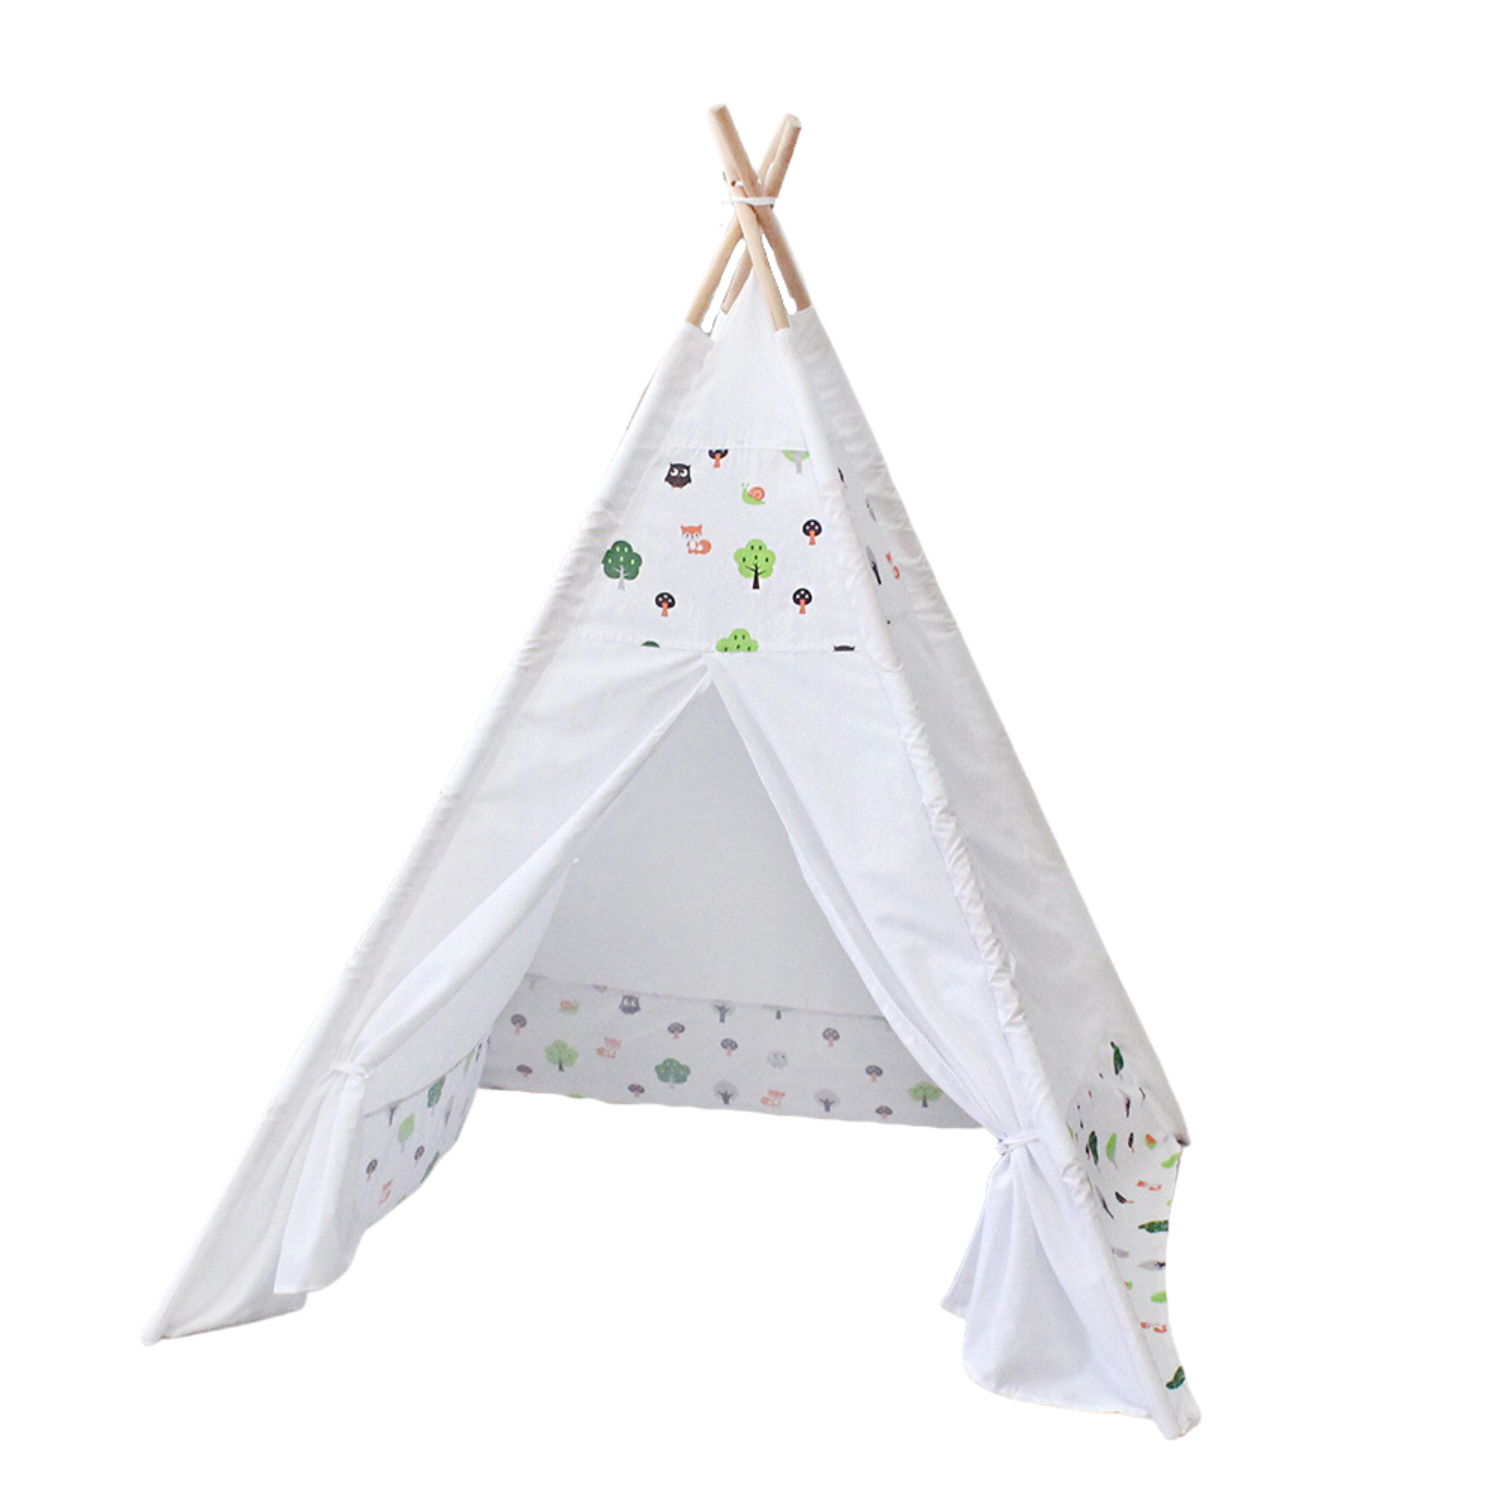 GOMINIMO Kids Teepee Tent with Side Window and Carry Case (White Forest) GO-KT-101-LK - SILBERSHELL